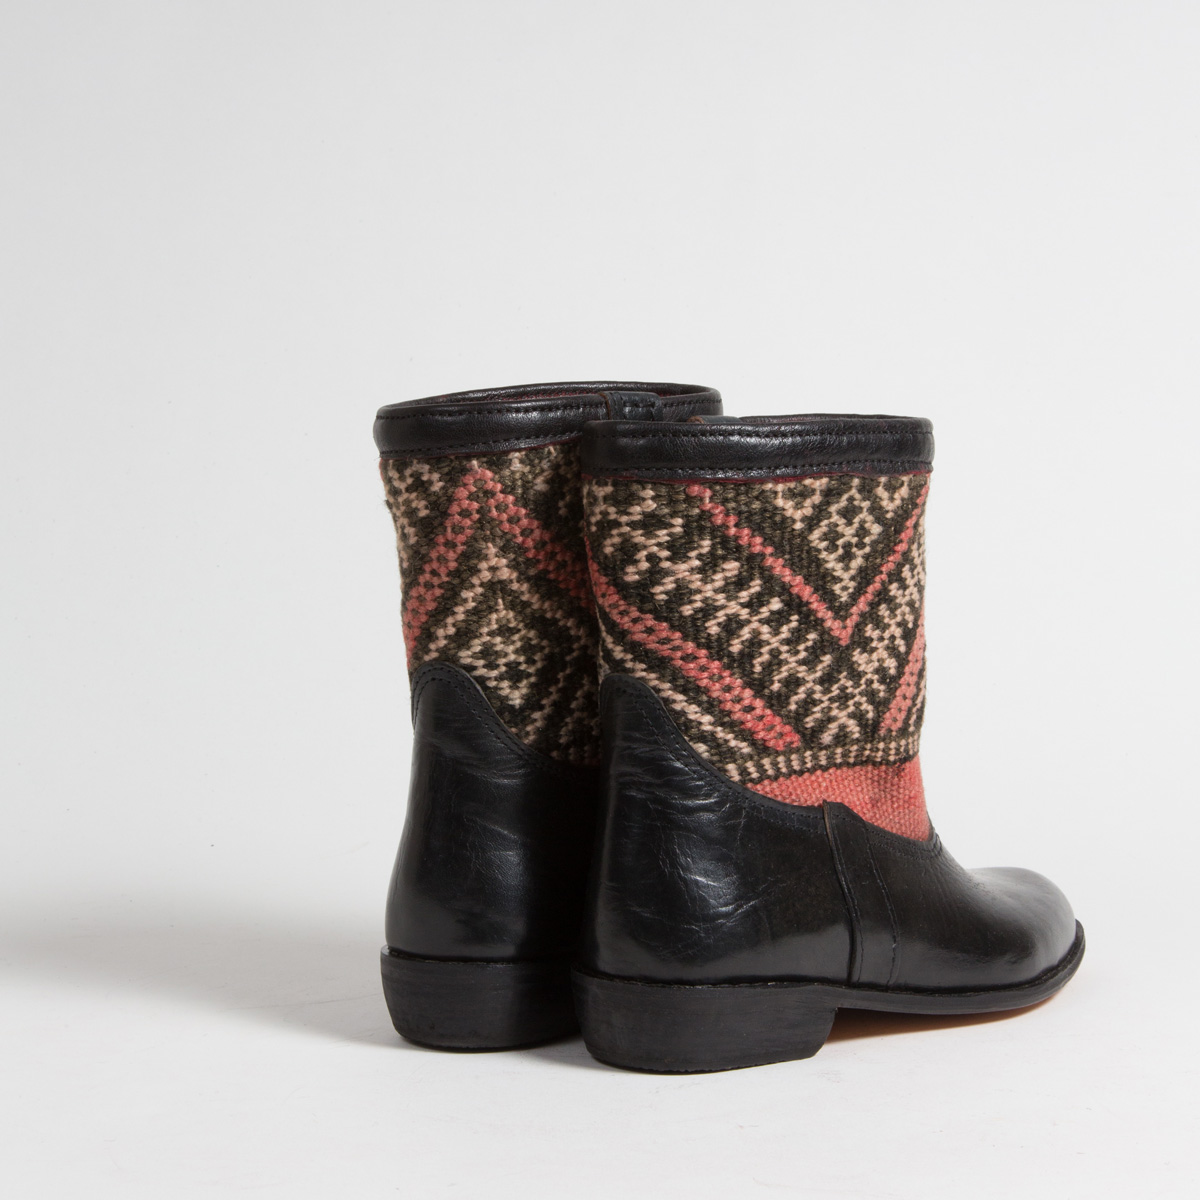 Bottines Kilim cuir mababouche artisanales (Réf. RPN17-39)